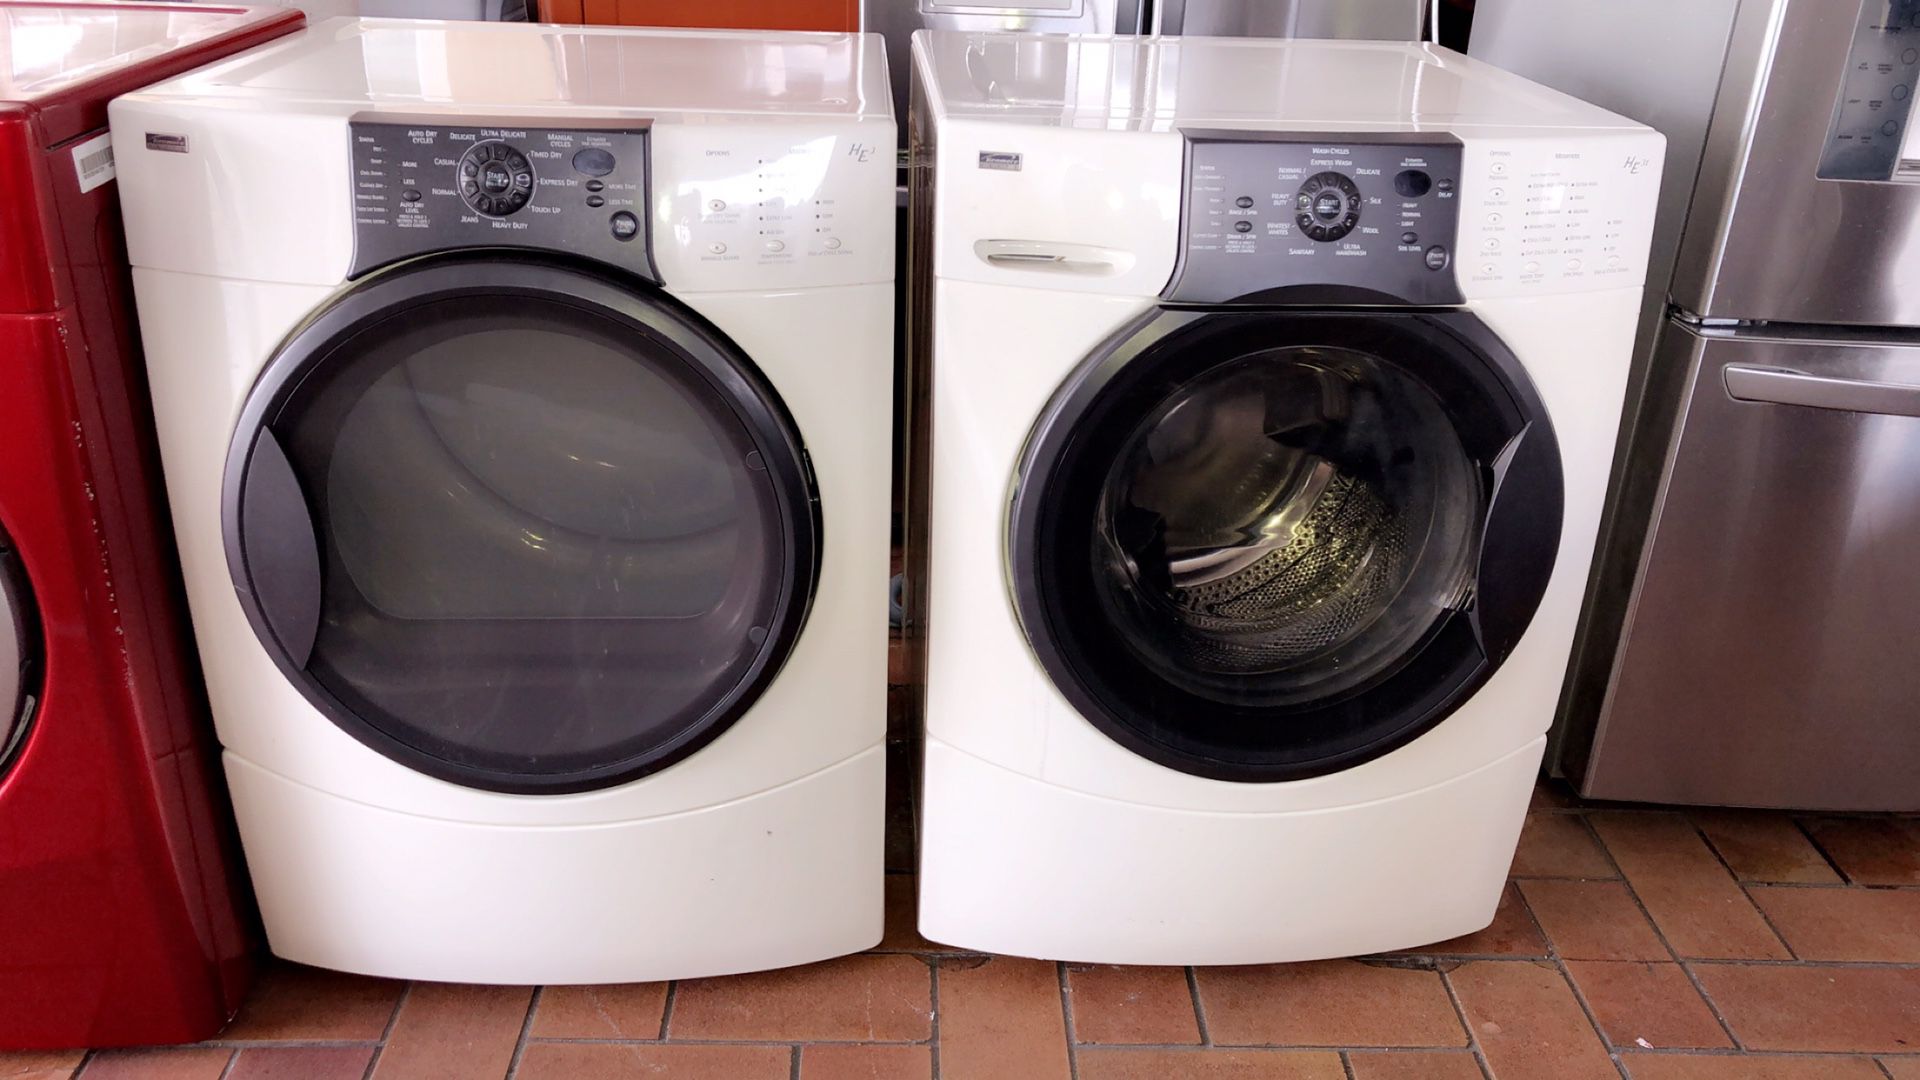 KENMORE WHITE SET OF WASHER AND DRYER USED BUT IN GREAT CONDITION WORKS LIKE NEW I GIVE WARRANTY . SECADORA Y LAVADORA KENMORE BLANCA USADAS PERO CO